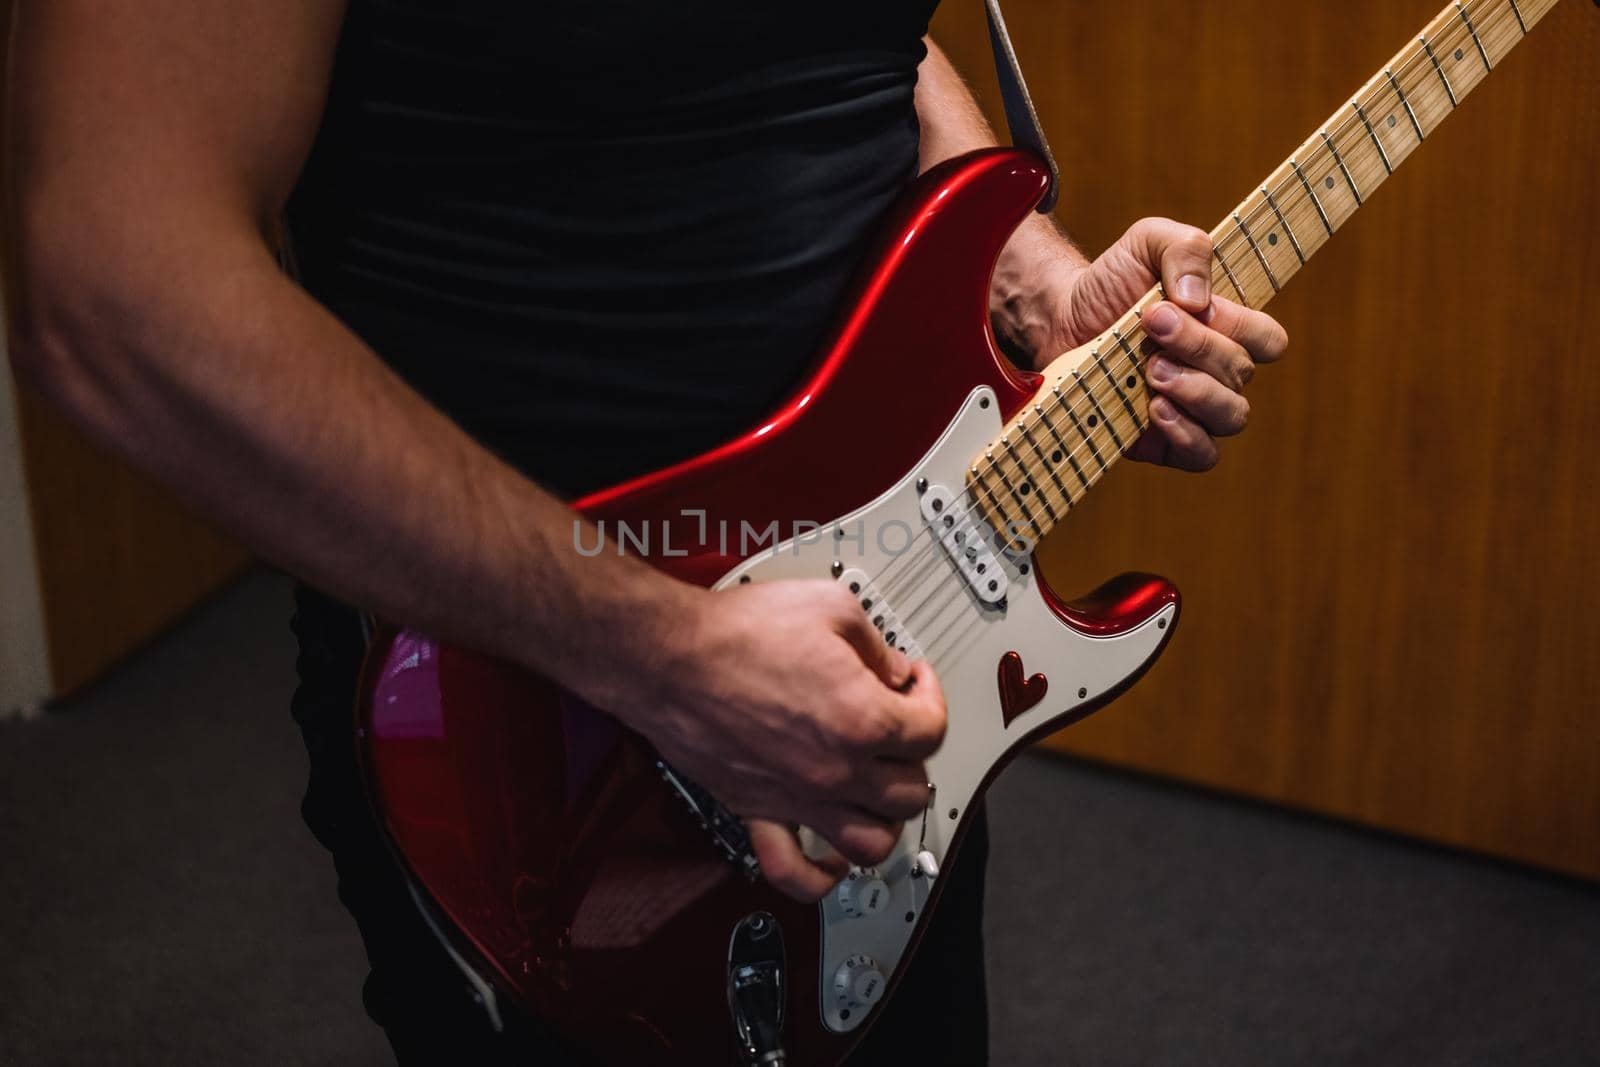 Repetition of rock music band. Cropped image of electric guitar player. Rehearsal base